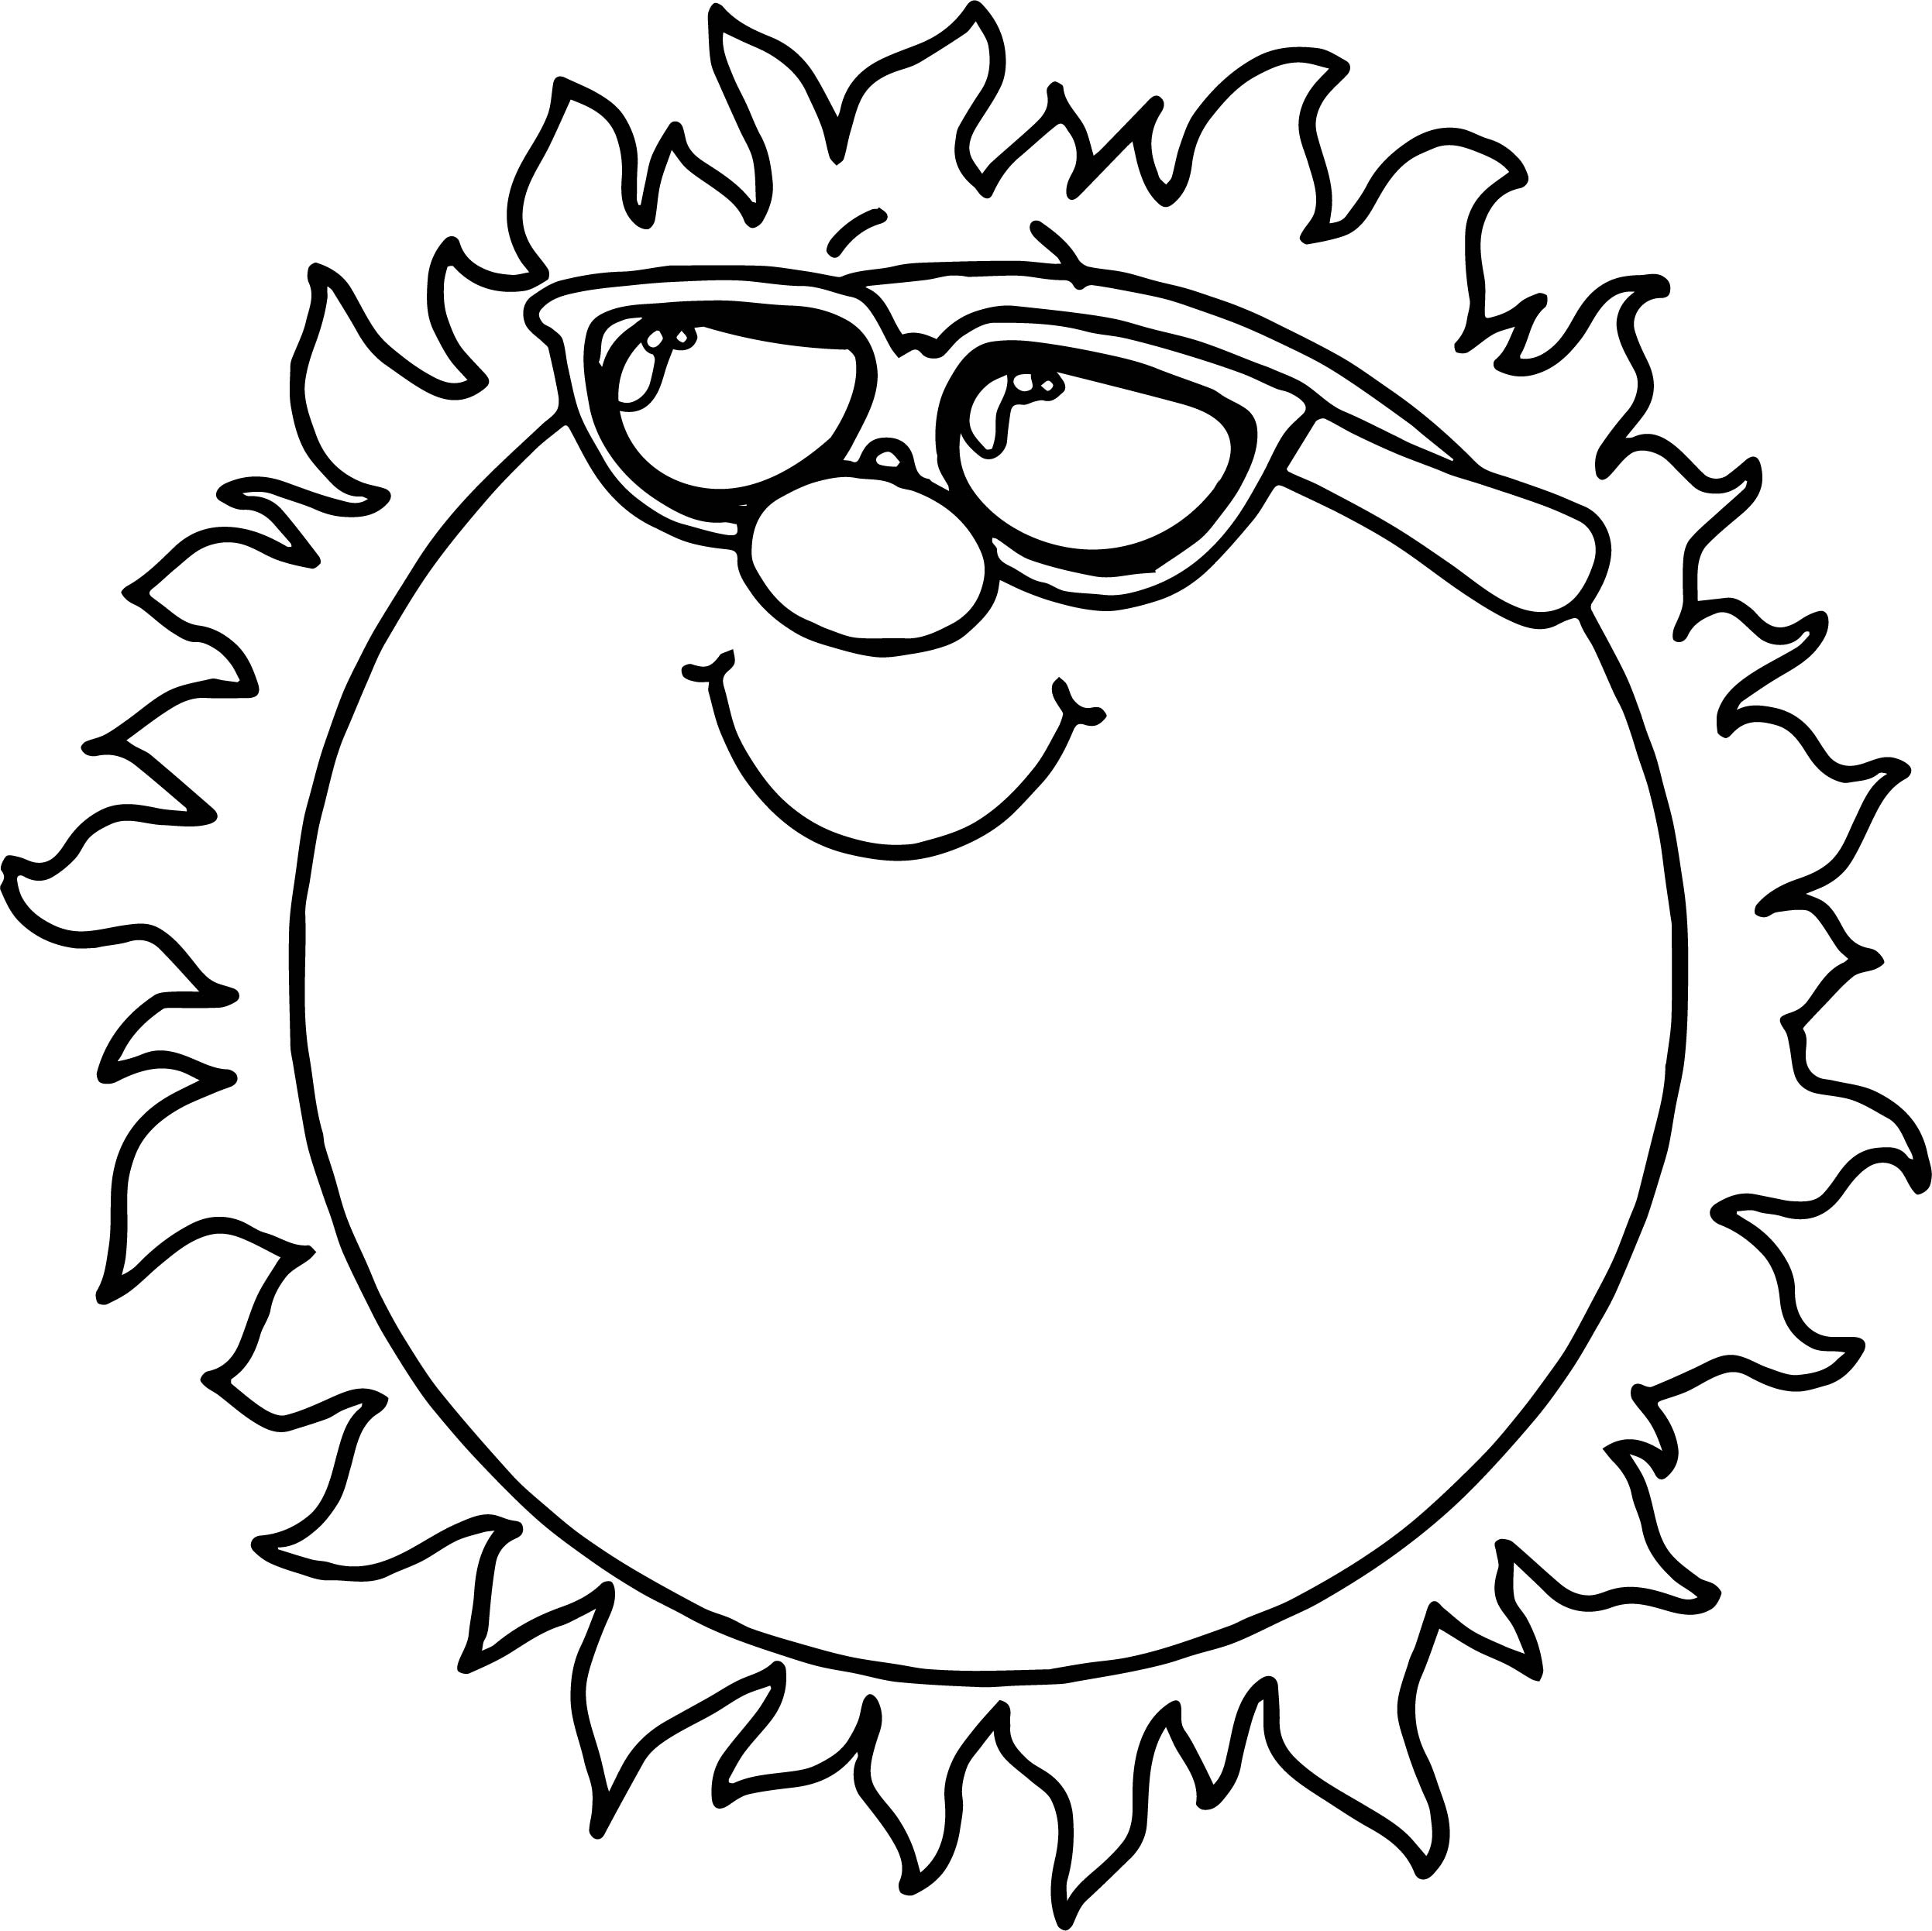 Sunshine Coloring Pages Printable